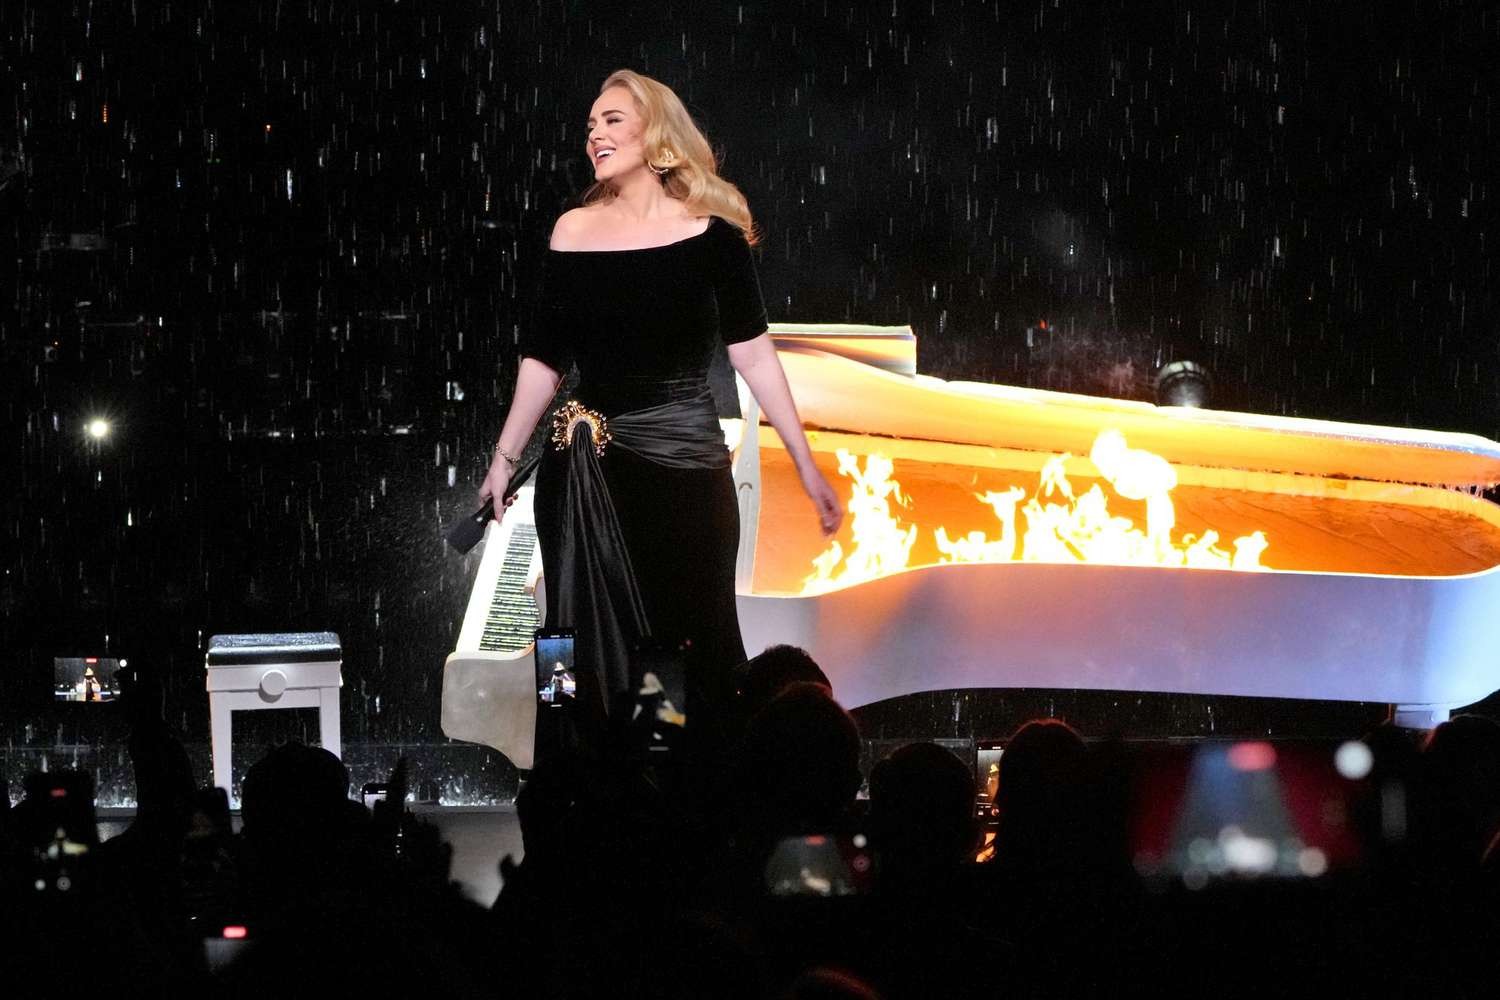 Adele boosts The Walking Dead finale by giving the series a shoutout at her concert